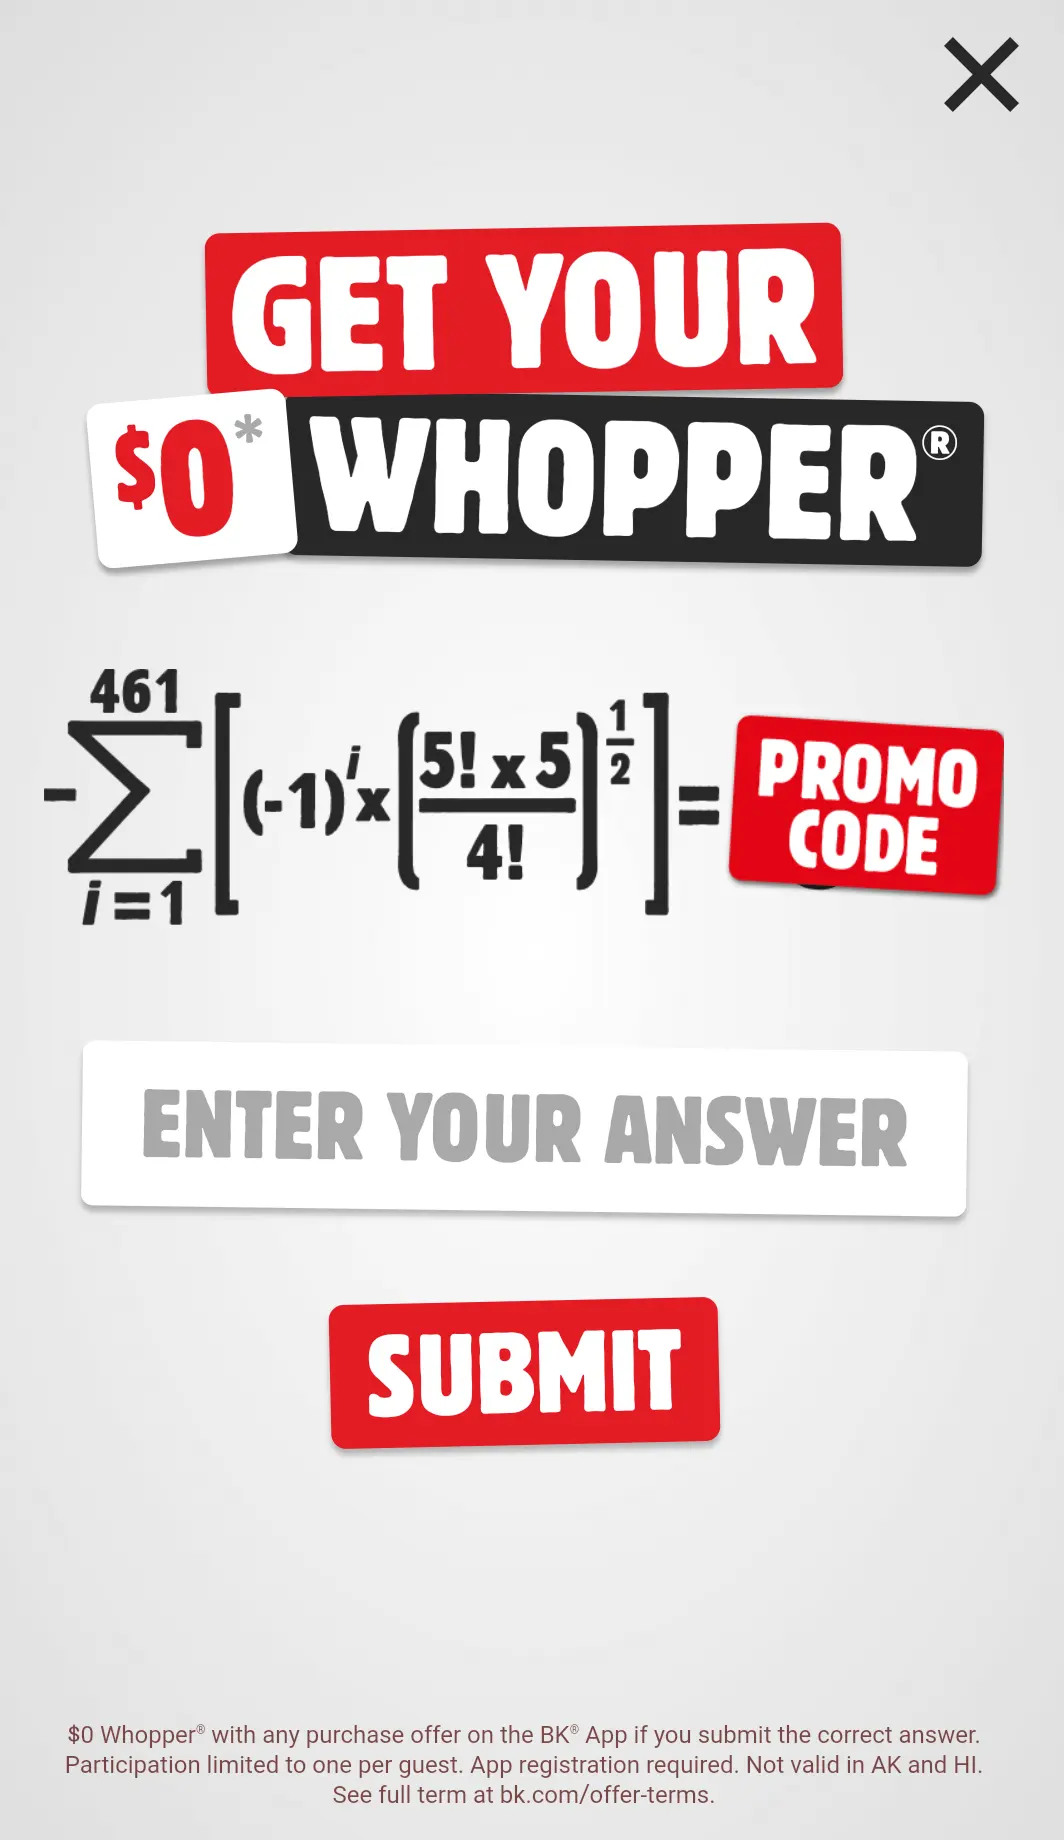 Burger King App: Solve Math Equation, Earn Coupon Towards Free Whopper w/